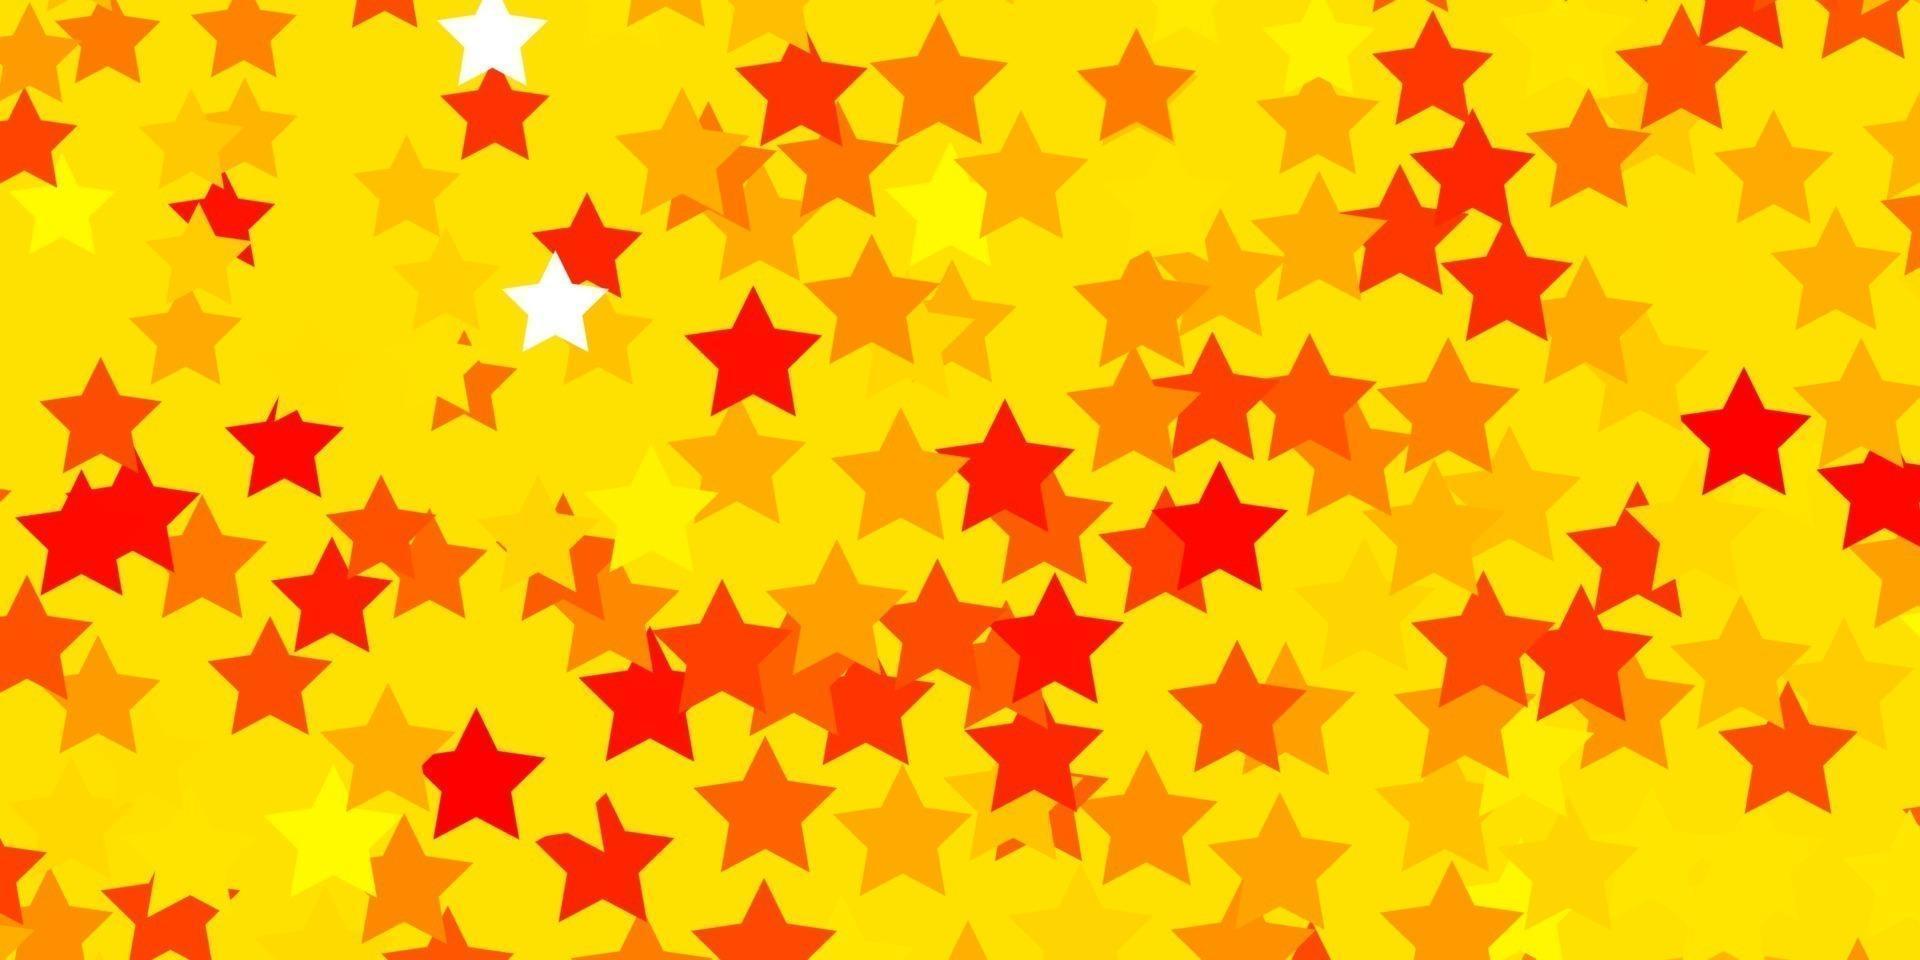 Light Yellow vector template with neon stars.